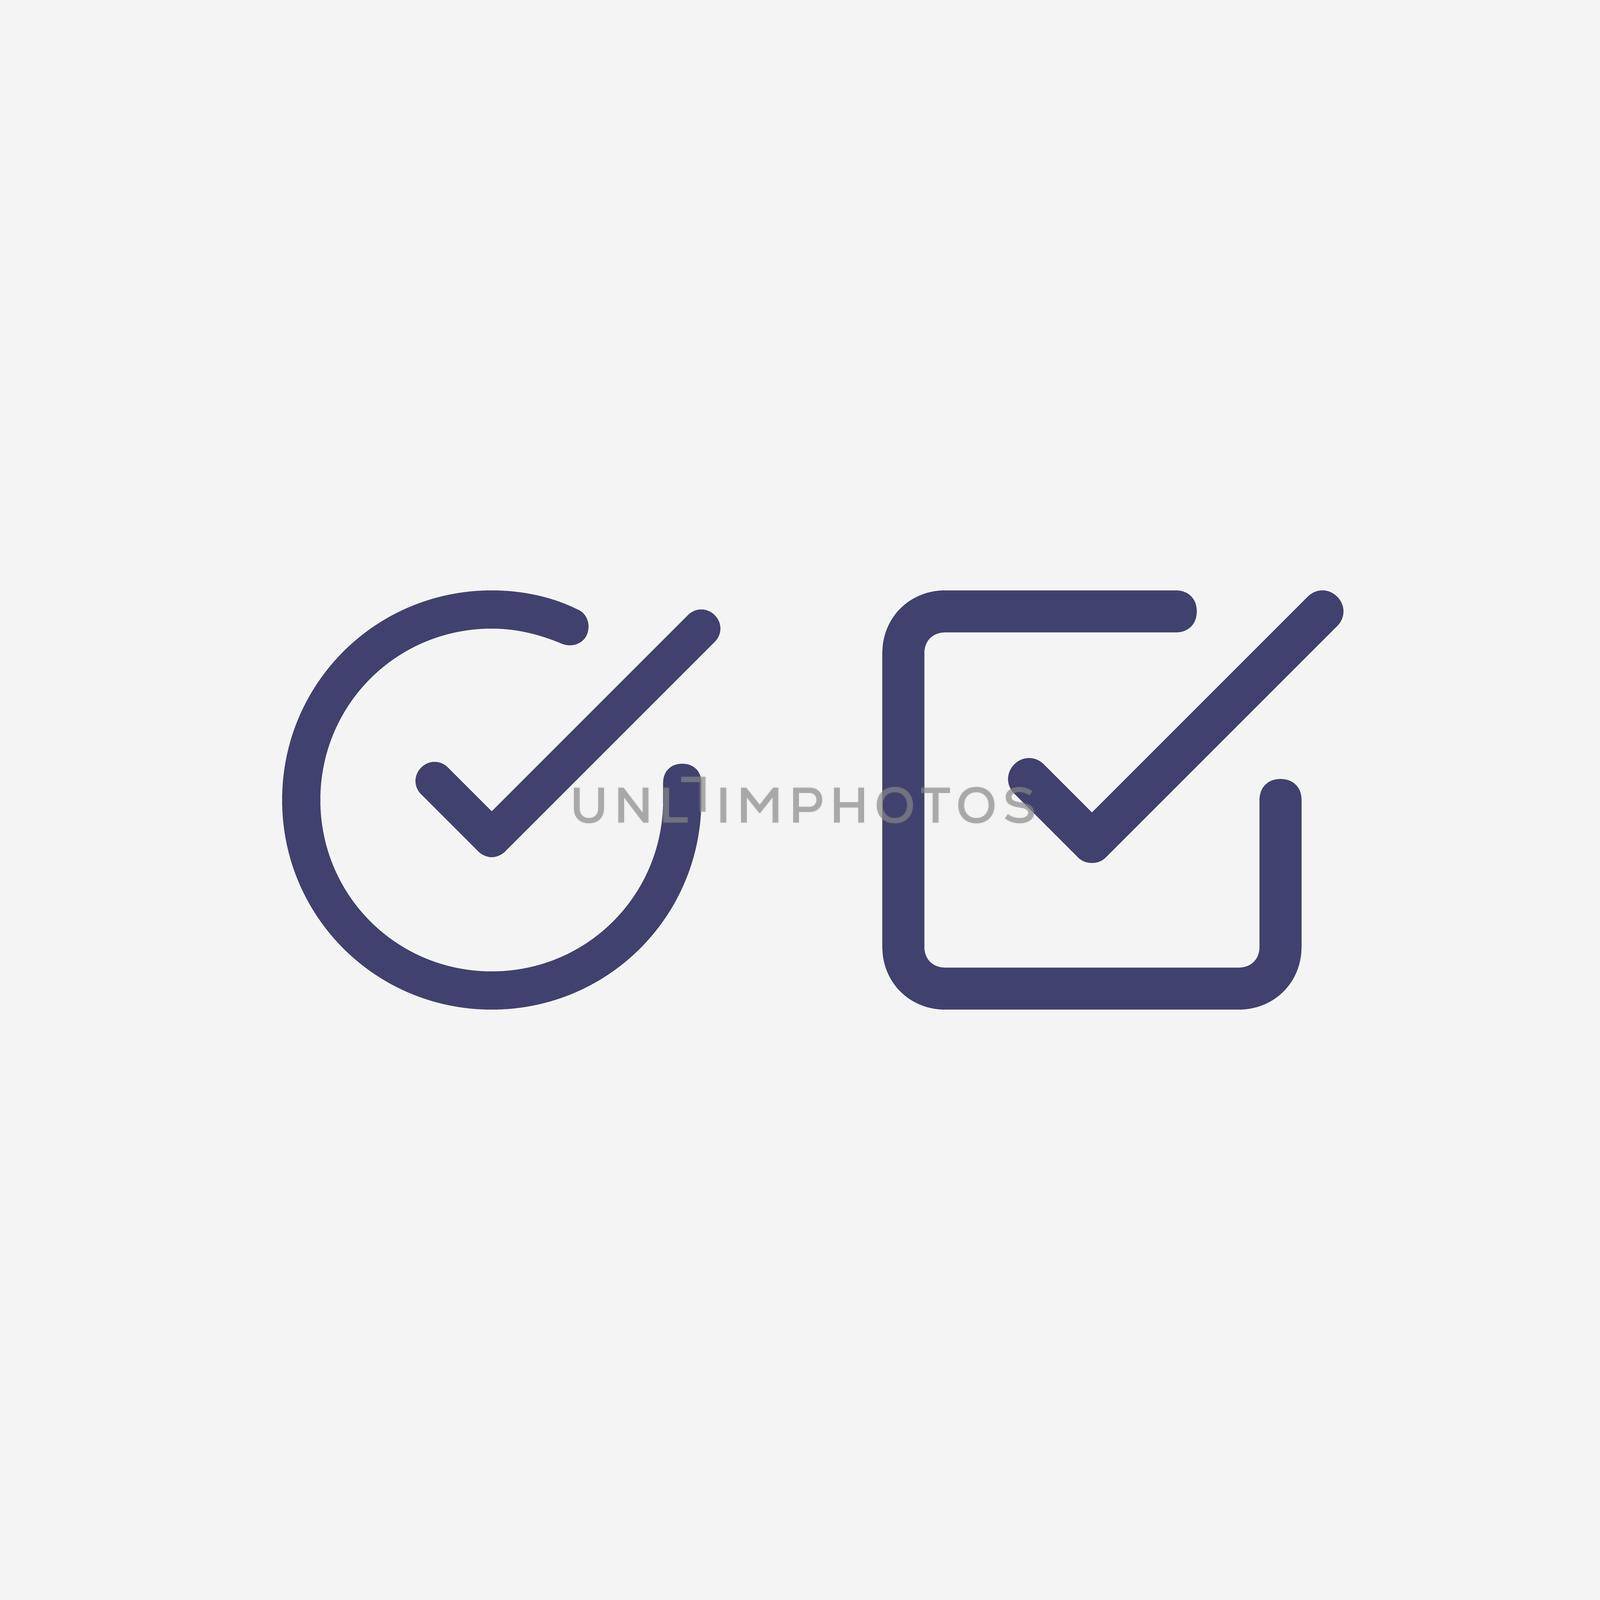 Check list button icon. Check mark in square and round box. Correct symbol. Stock Vector illustration isolated on white background. by Kyrylov